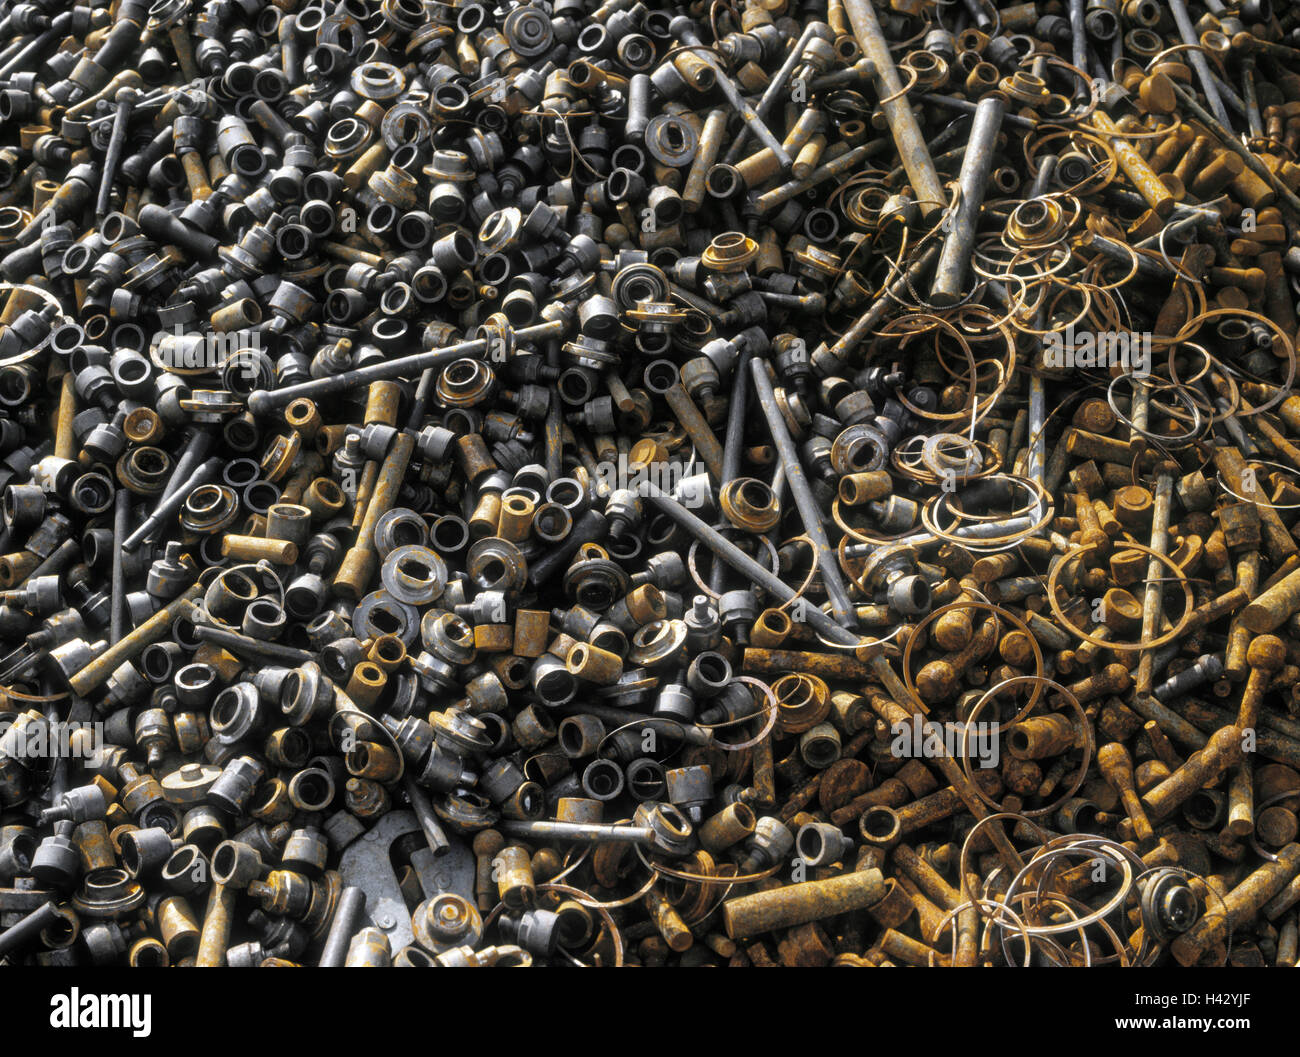 Scrap yard, iron cuts, rusts, detail, iron scrap metal, scrap metal, steel, rolling, screwing, sleeves, steel pens, recycling, recycling, re-use, rust, flight rust, scrap iron, collective place, scrap metal, corrosion, background, Still life Stock Photo